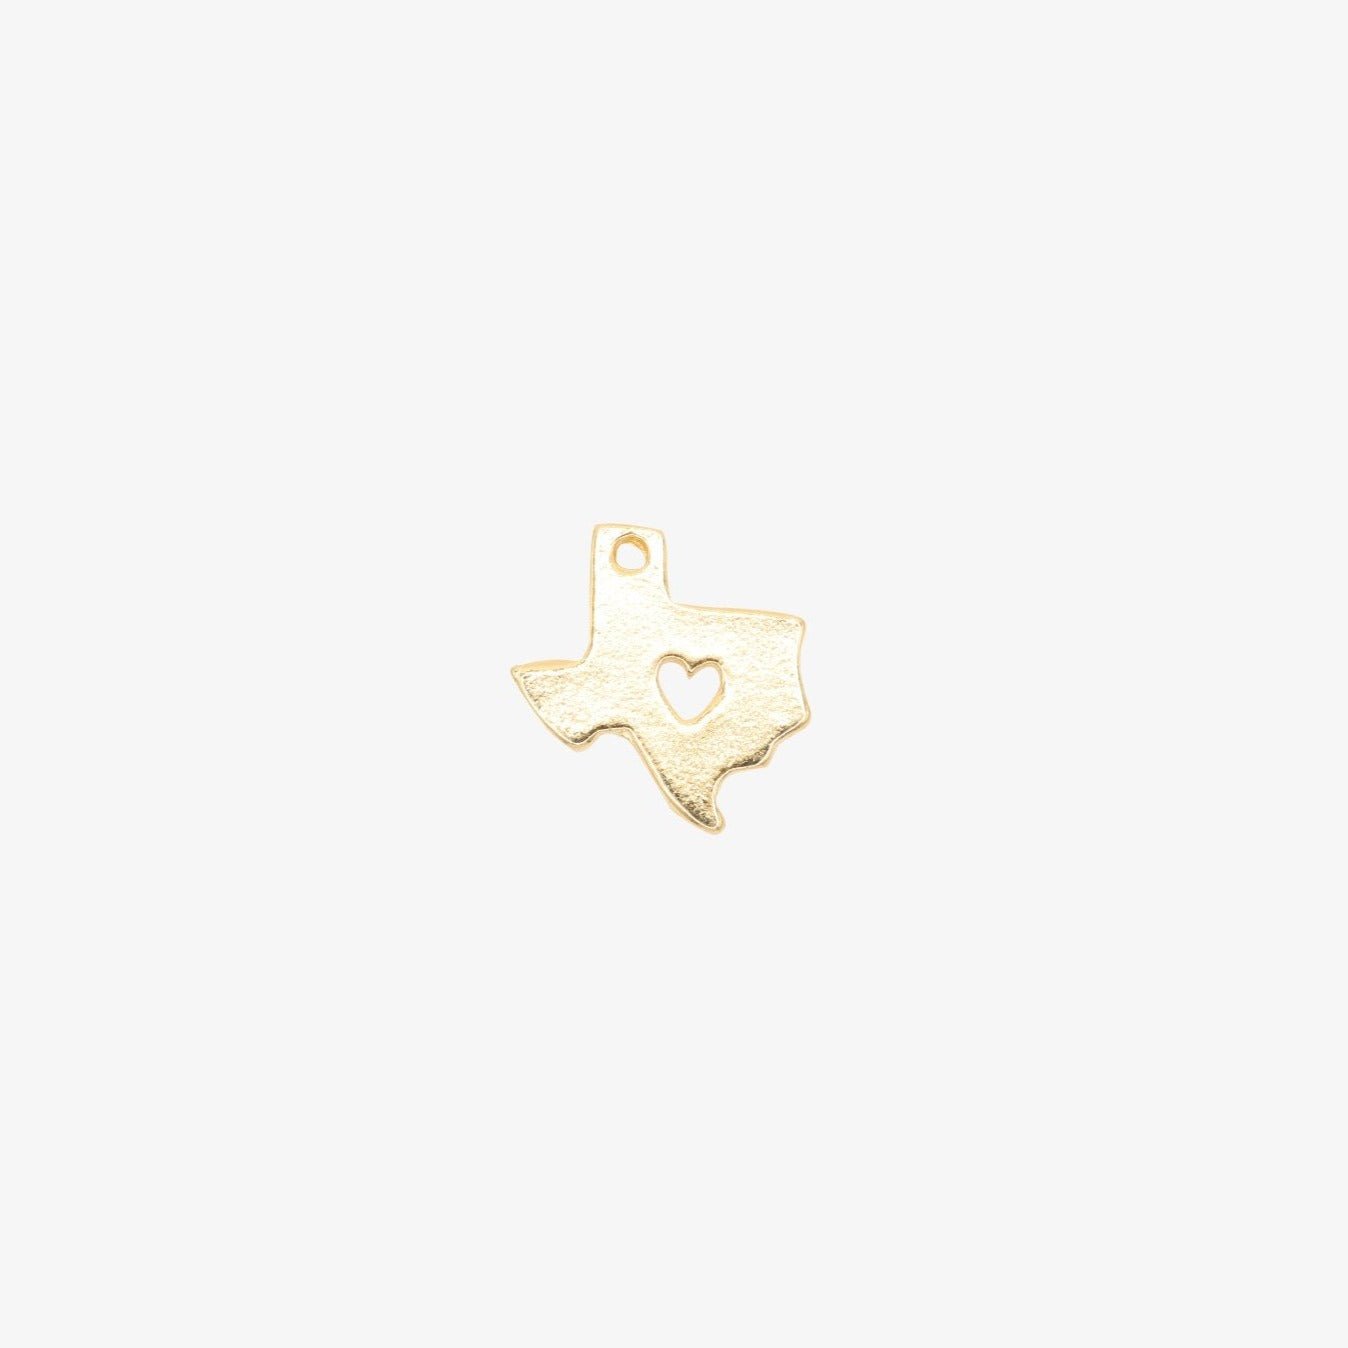 Texas State Charm with Heart 14K Gold - GoldandWillow